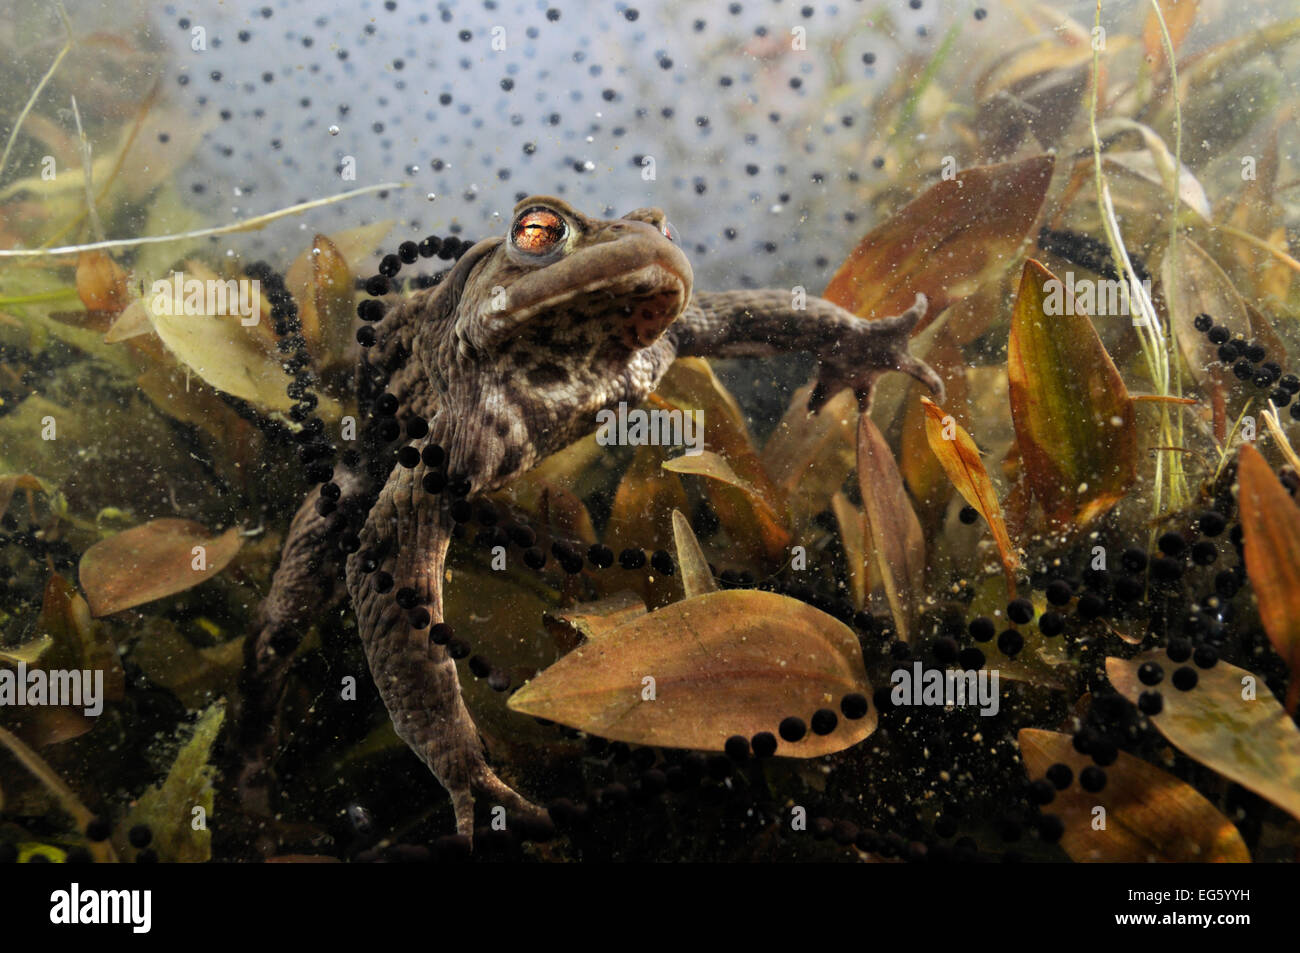 Common toad (Bufo bufo) in a pond, with toad spawn and frogspawn, Coldharbour, Surrey, England, UK, March. 2020VISION Book Plate. Stock Photo